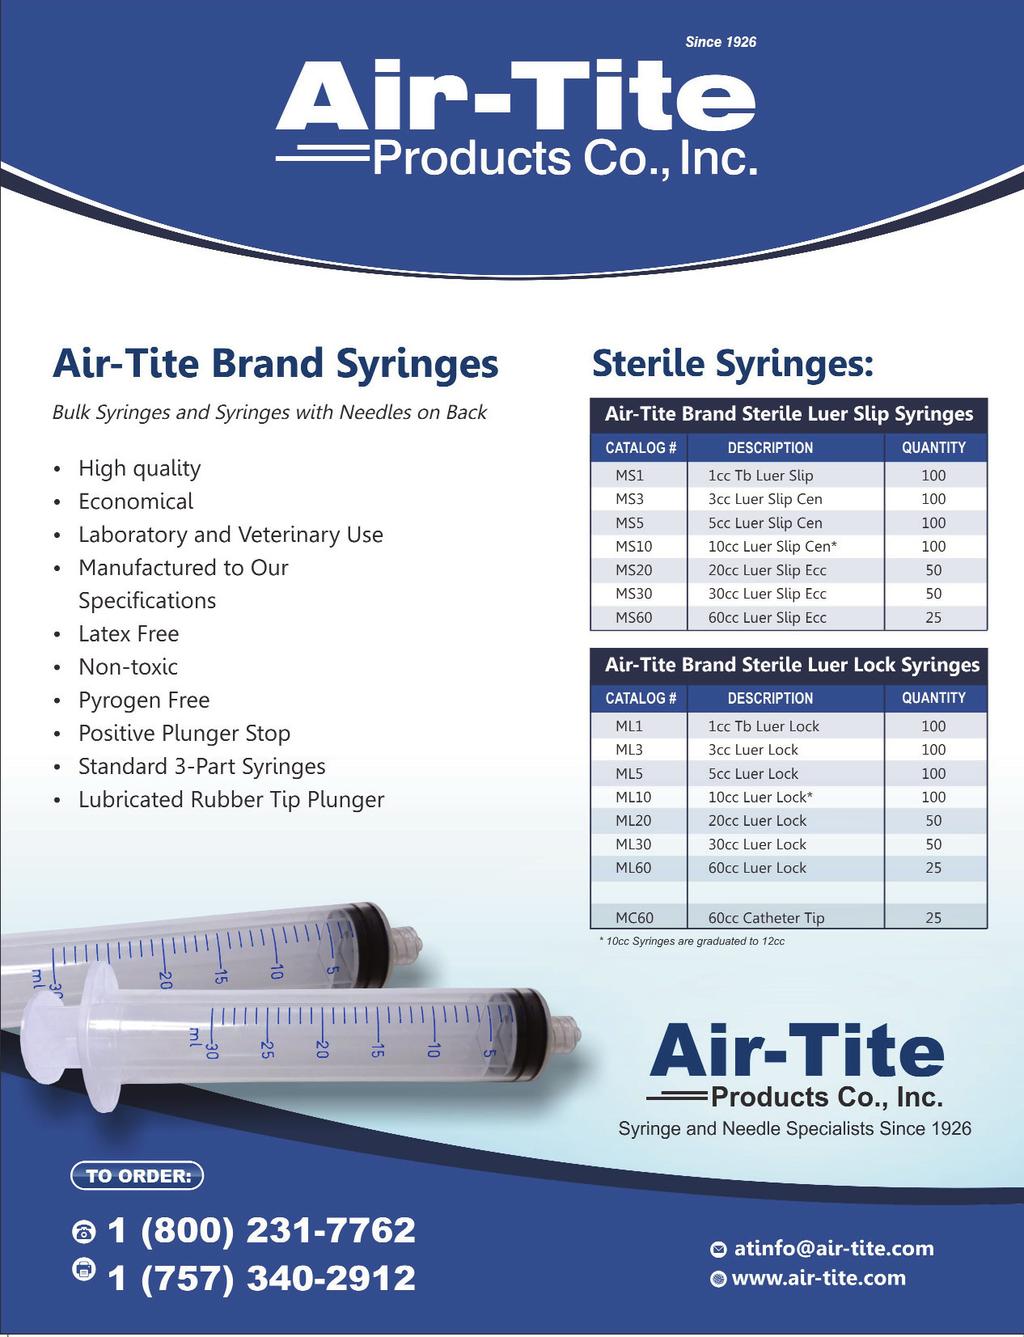 Air-Tite Products Co., Inc.